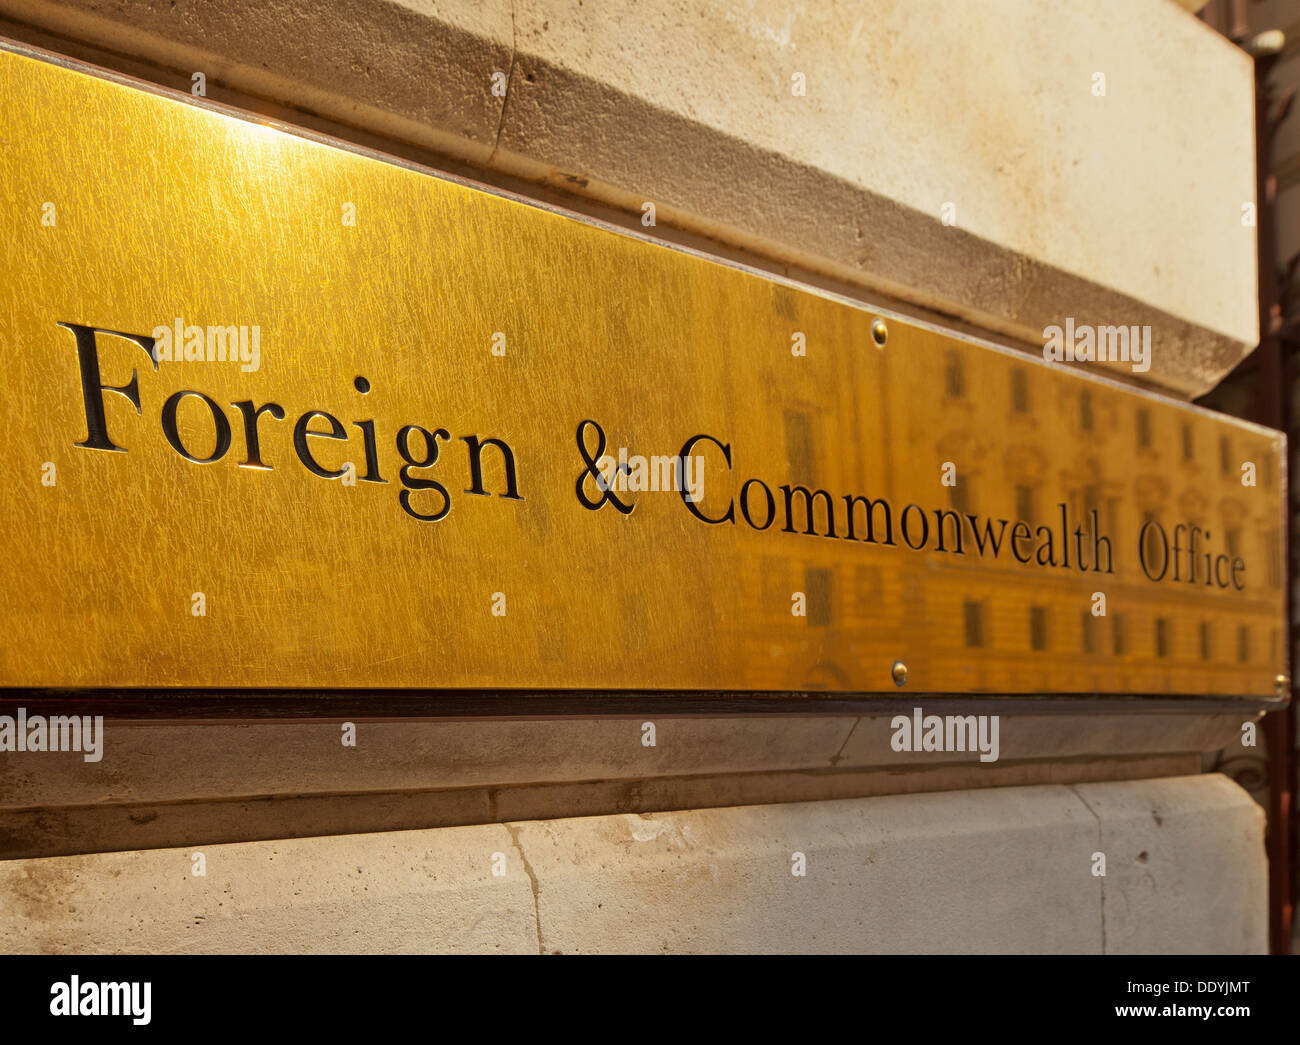 Il Foreign and Commonwealth Office di Londra. Foto Stock